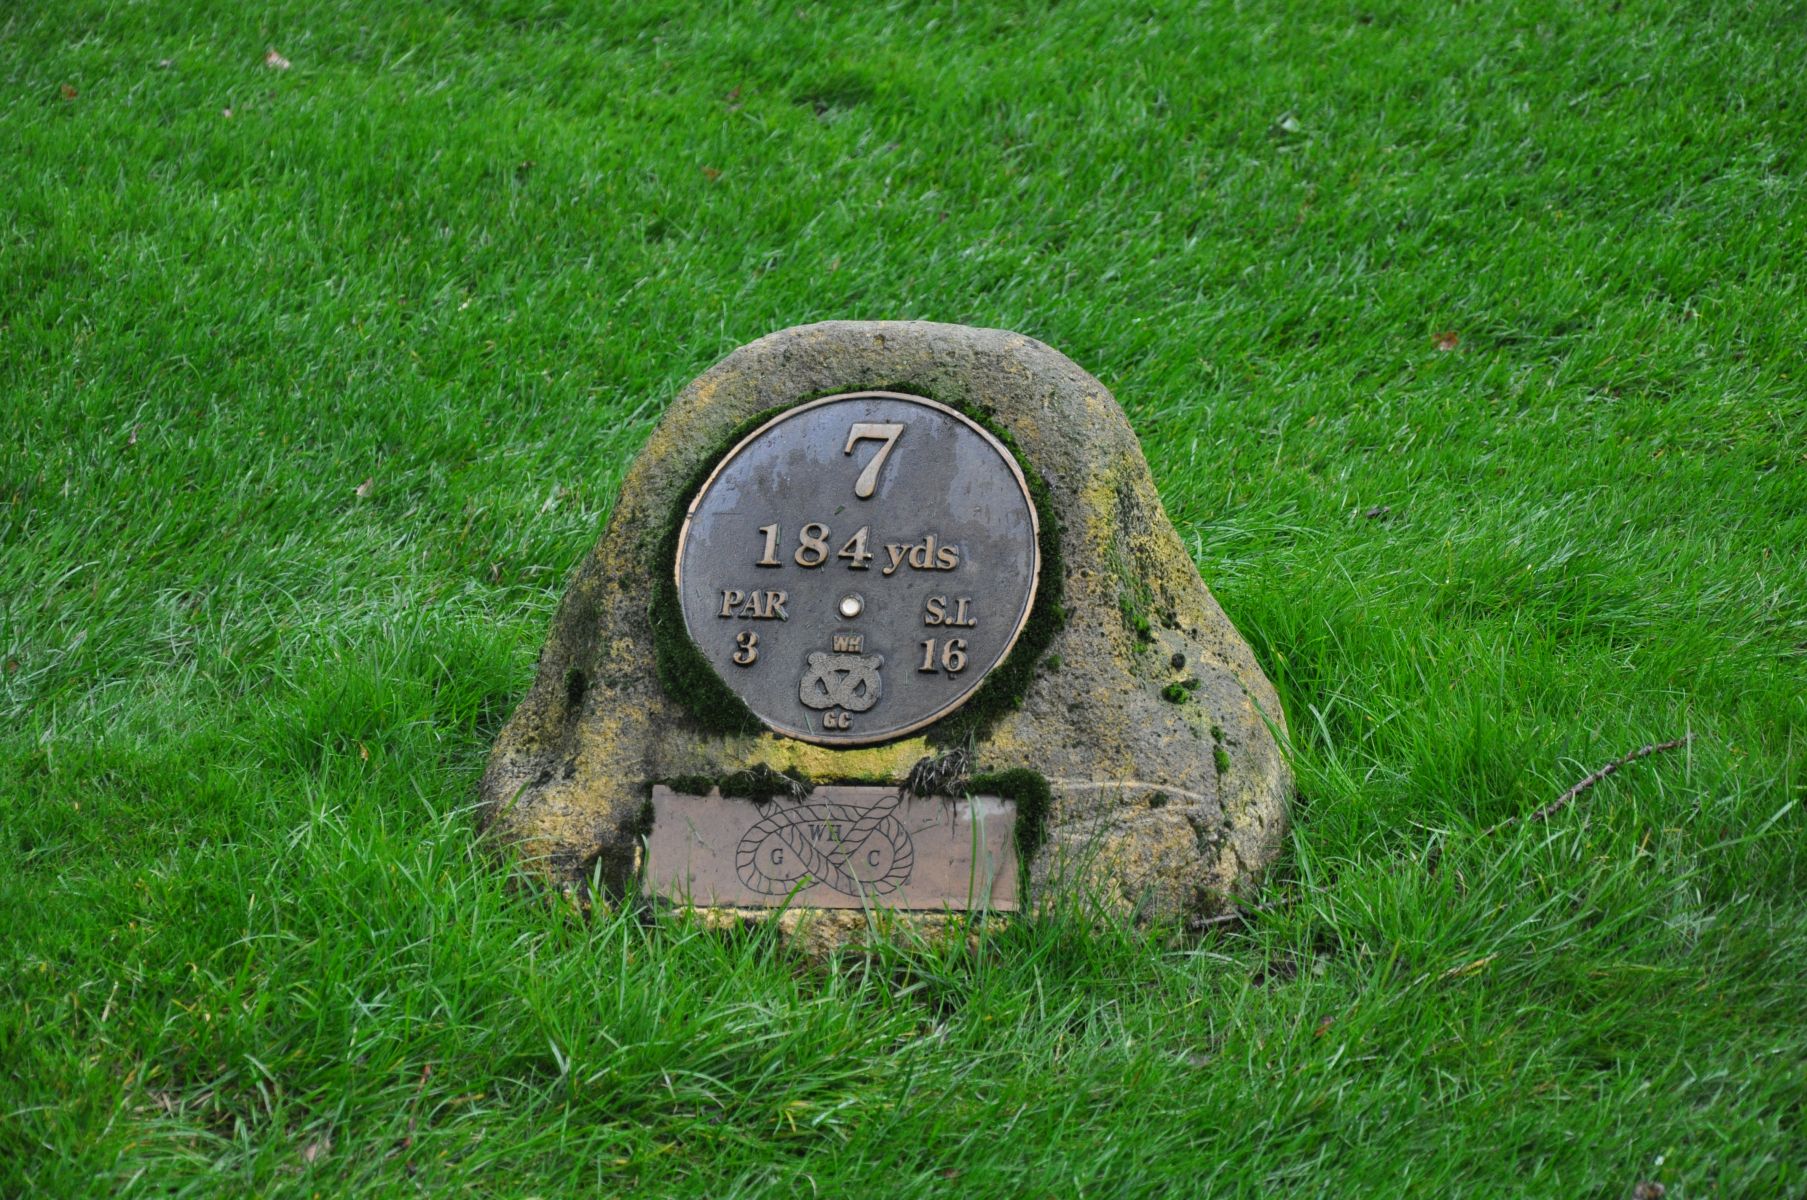 THE WHITE TEE MARKER FOR HOLE SEVEN